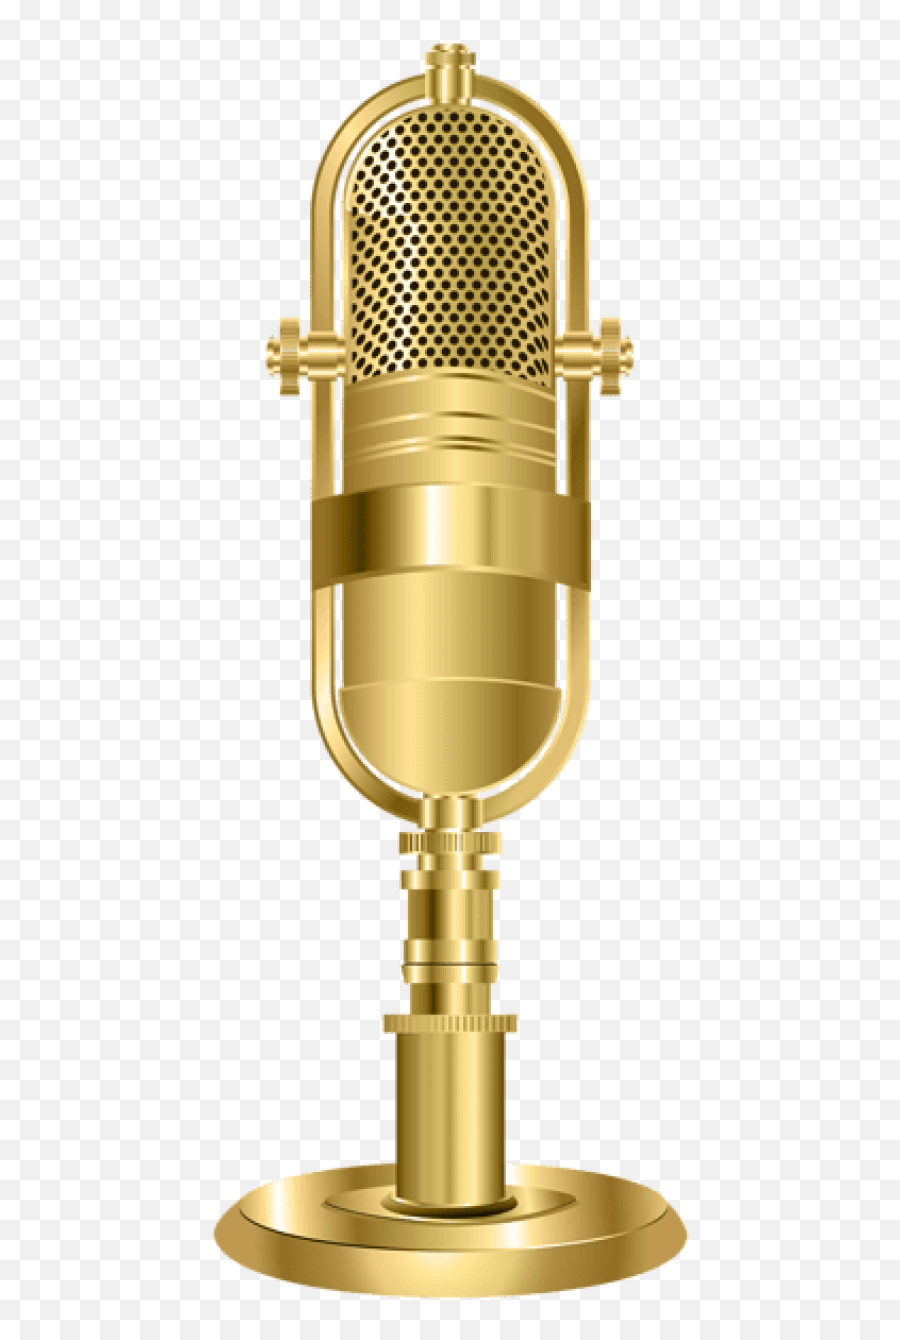 Download Hd Free Png Studio Microphone Gold - Transparent Background Gold Microphone,Free Studio Icon